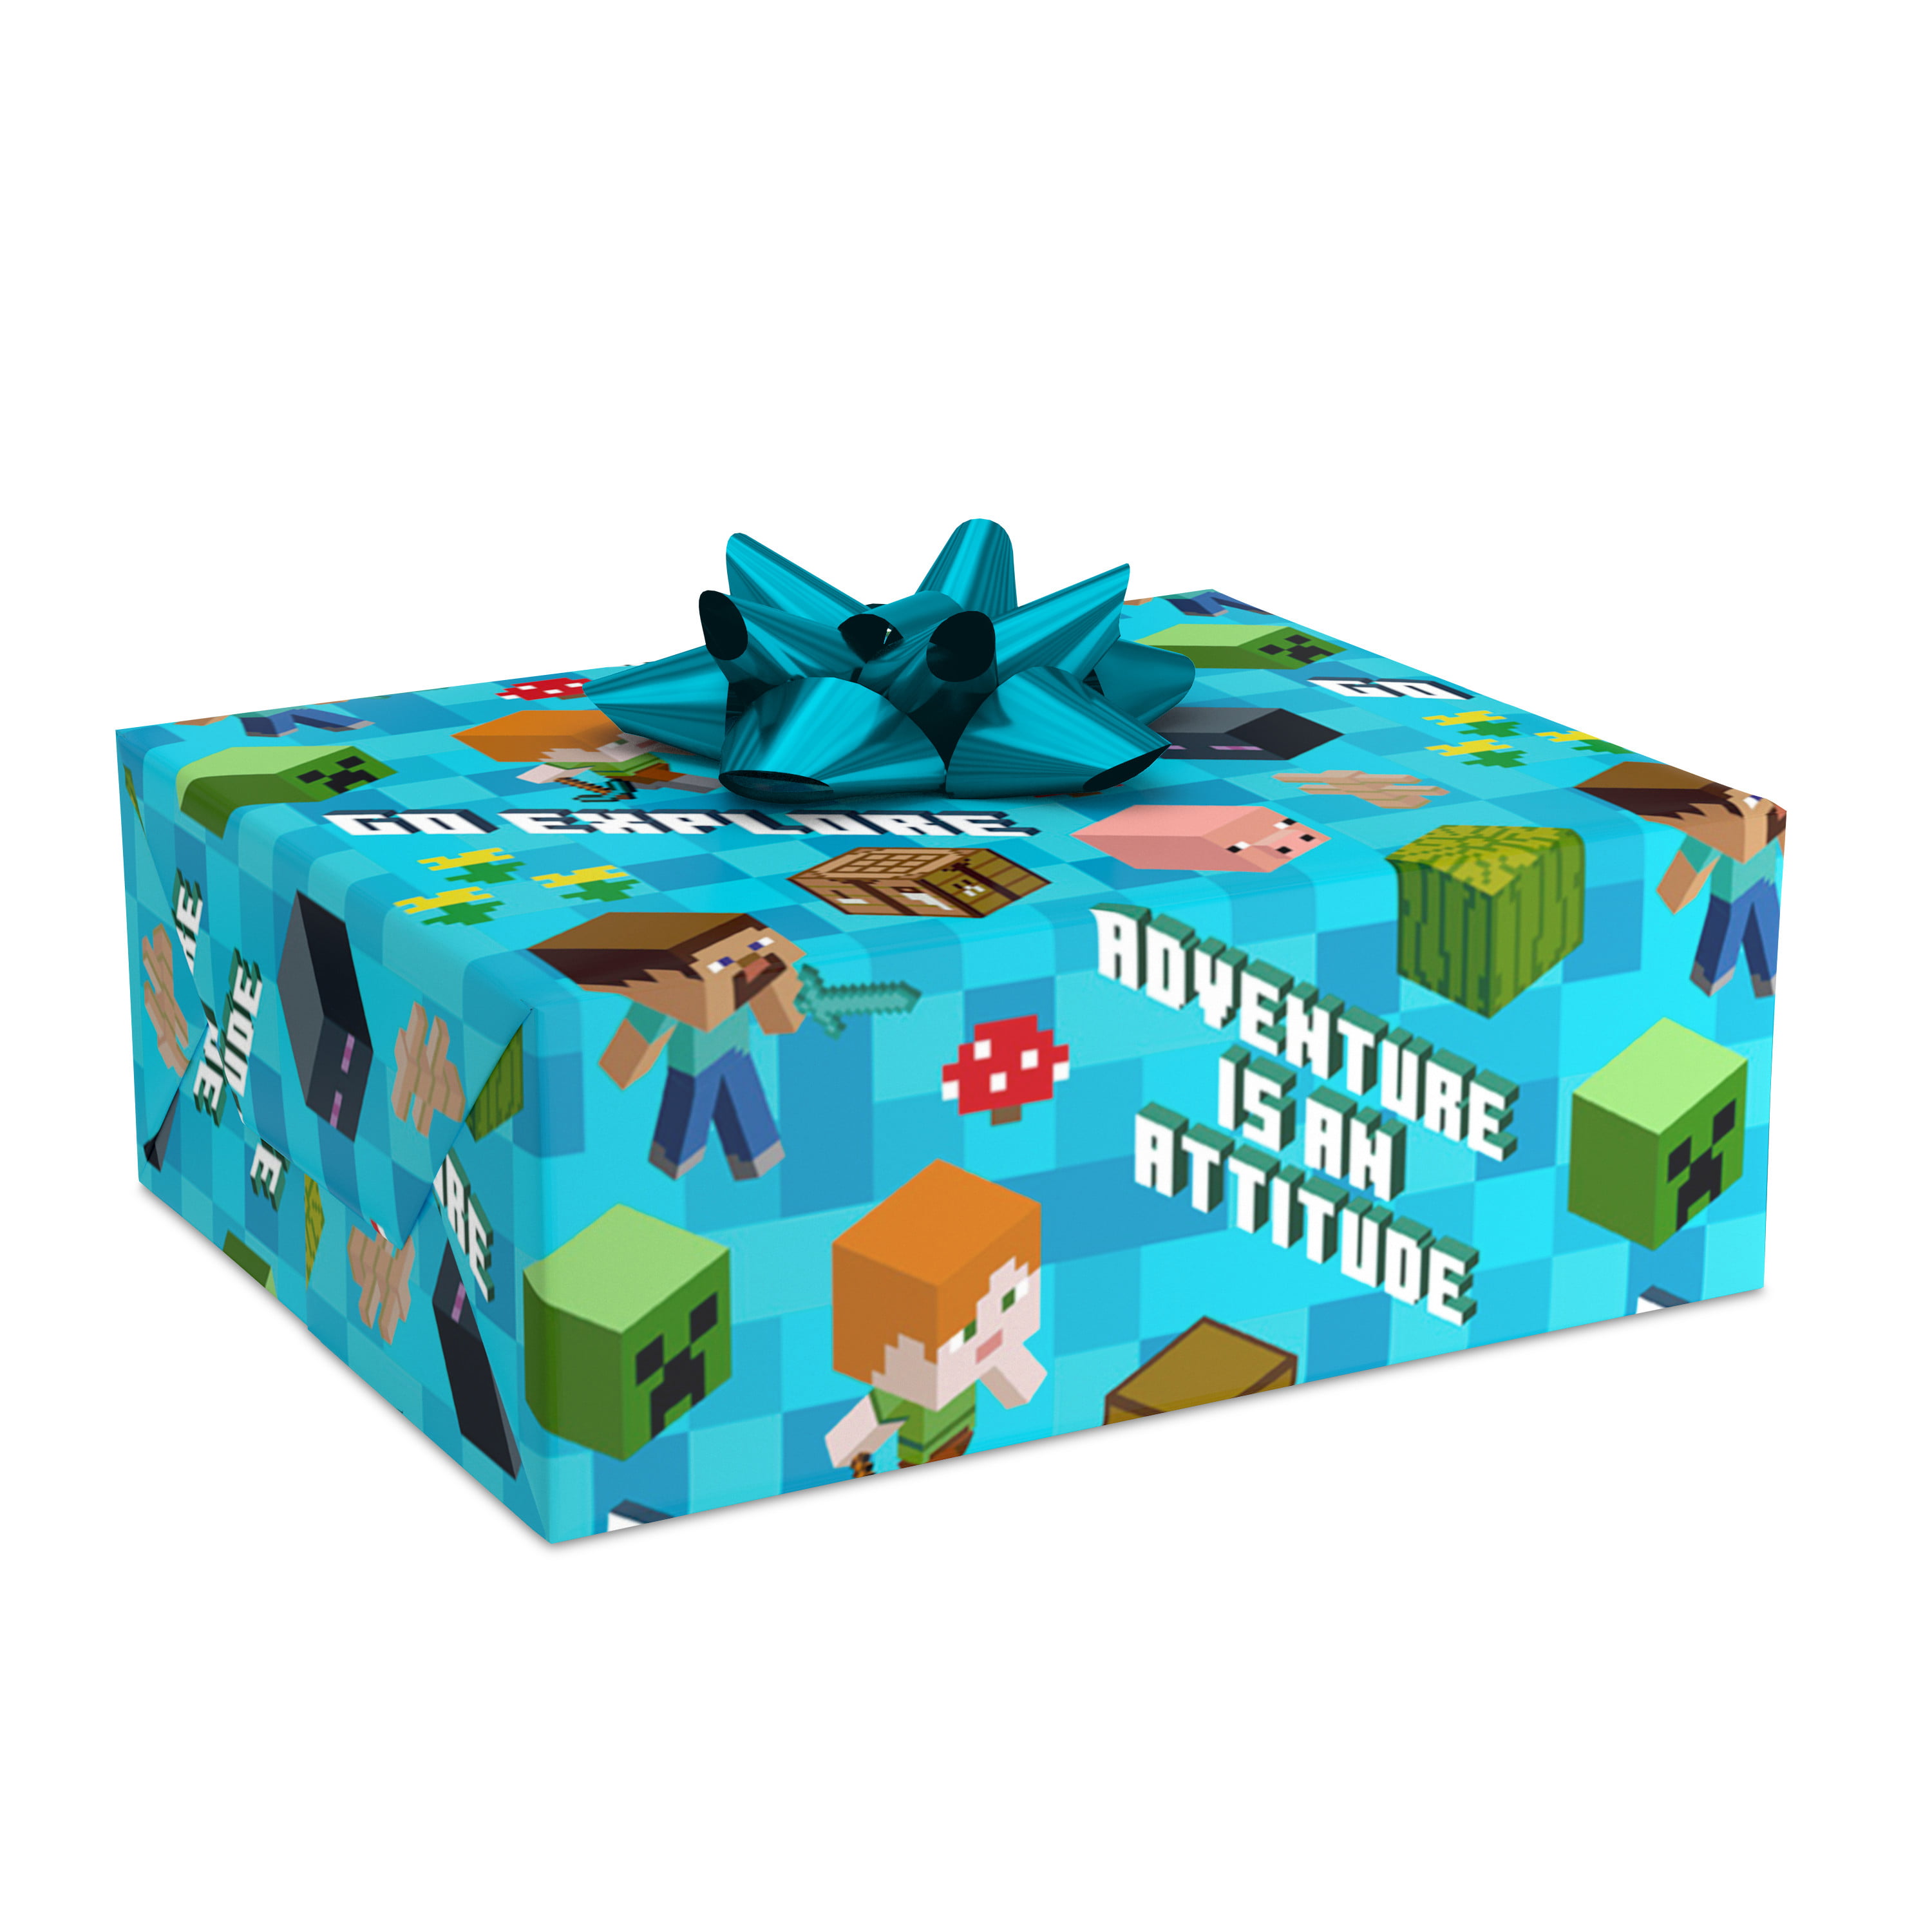 Minecraft+Gift+Wrapping+Paper  Minecraft fabric, Minecraft wrapping paper,  Minecraft printables